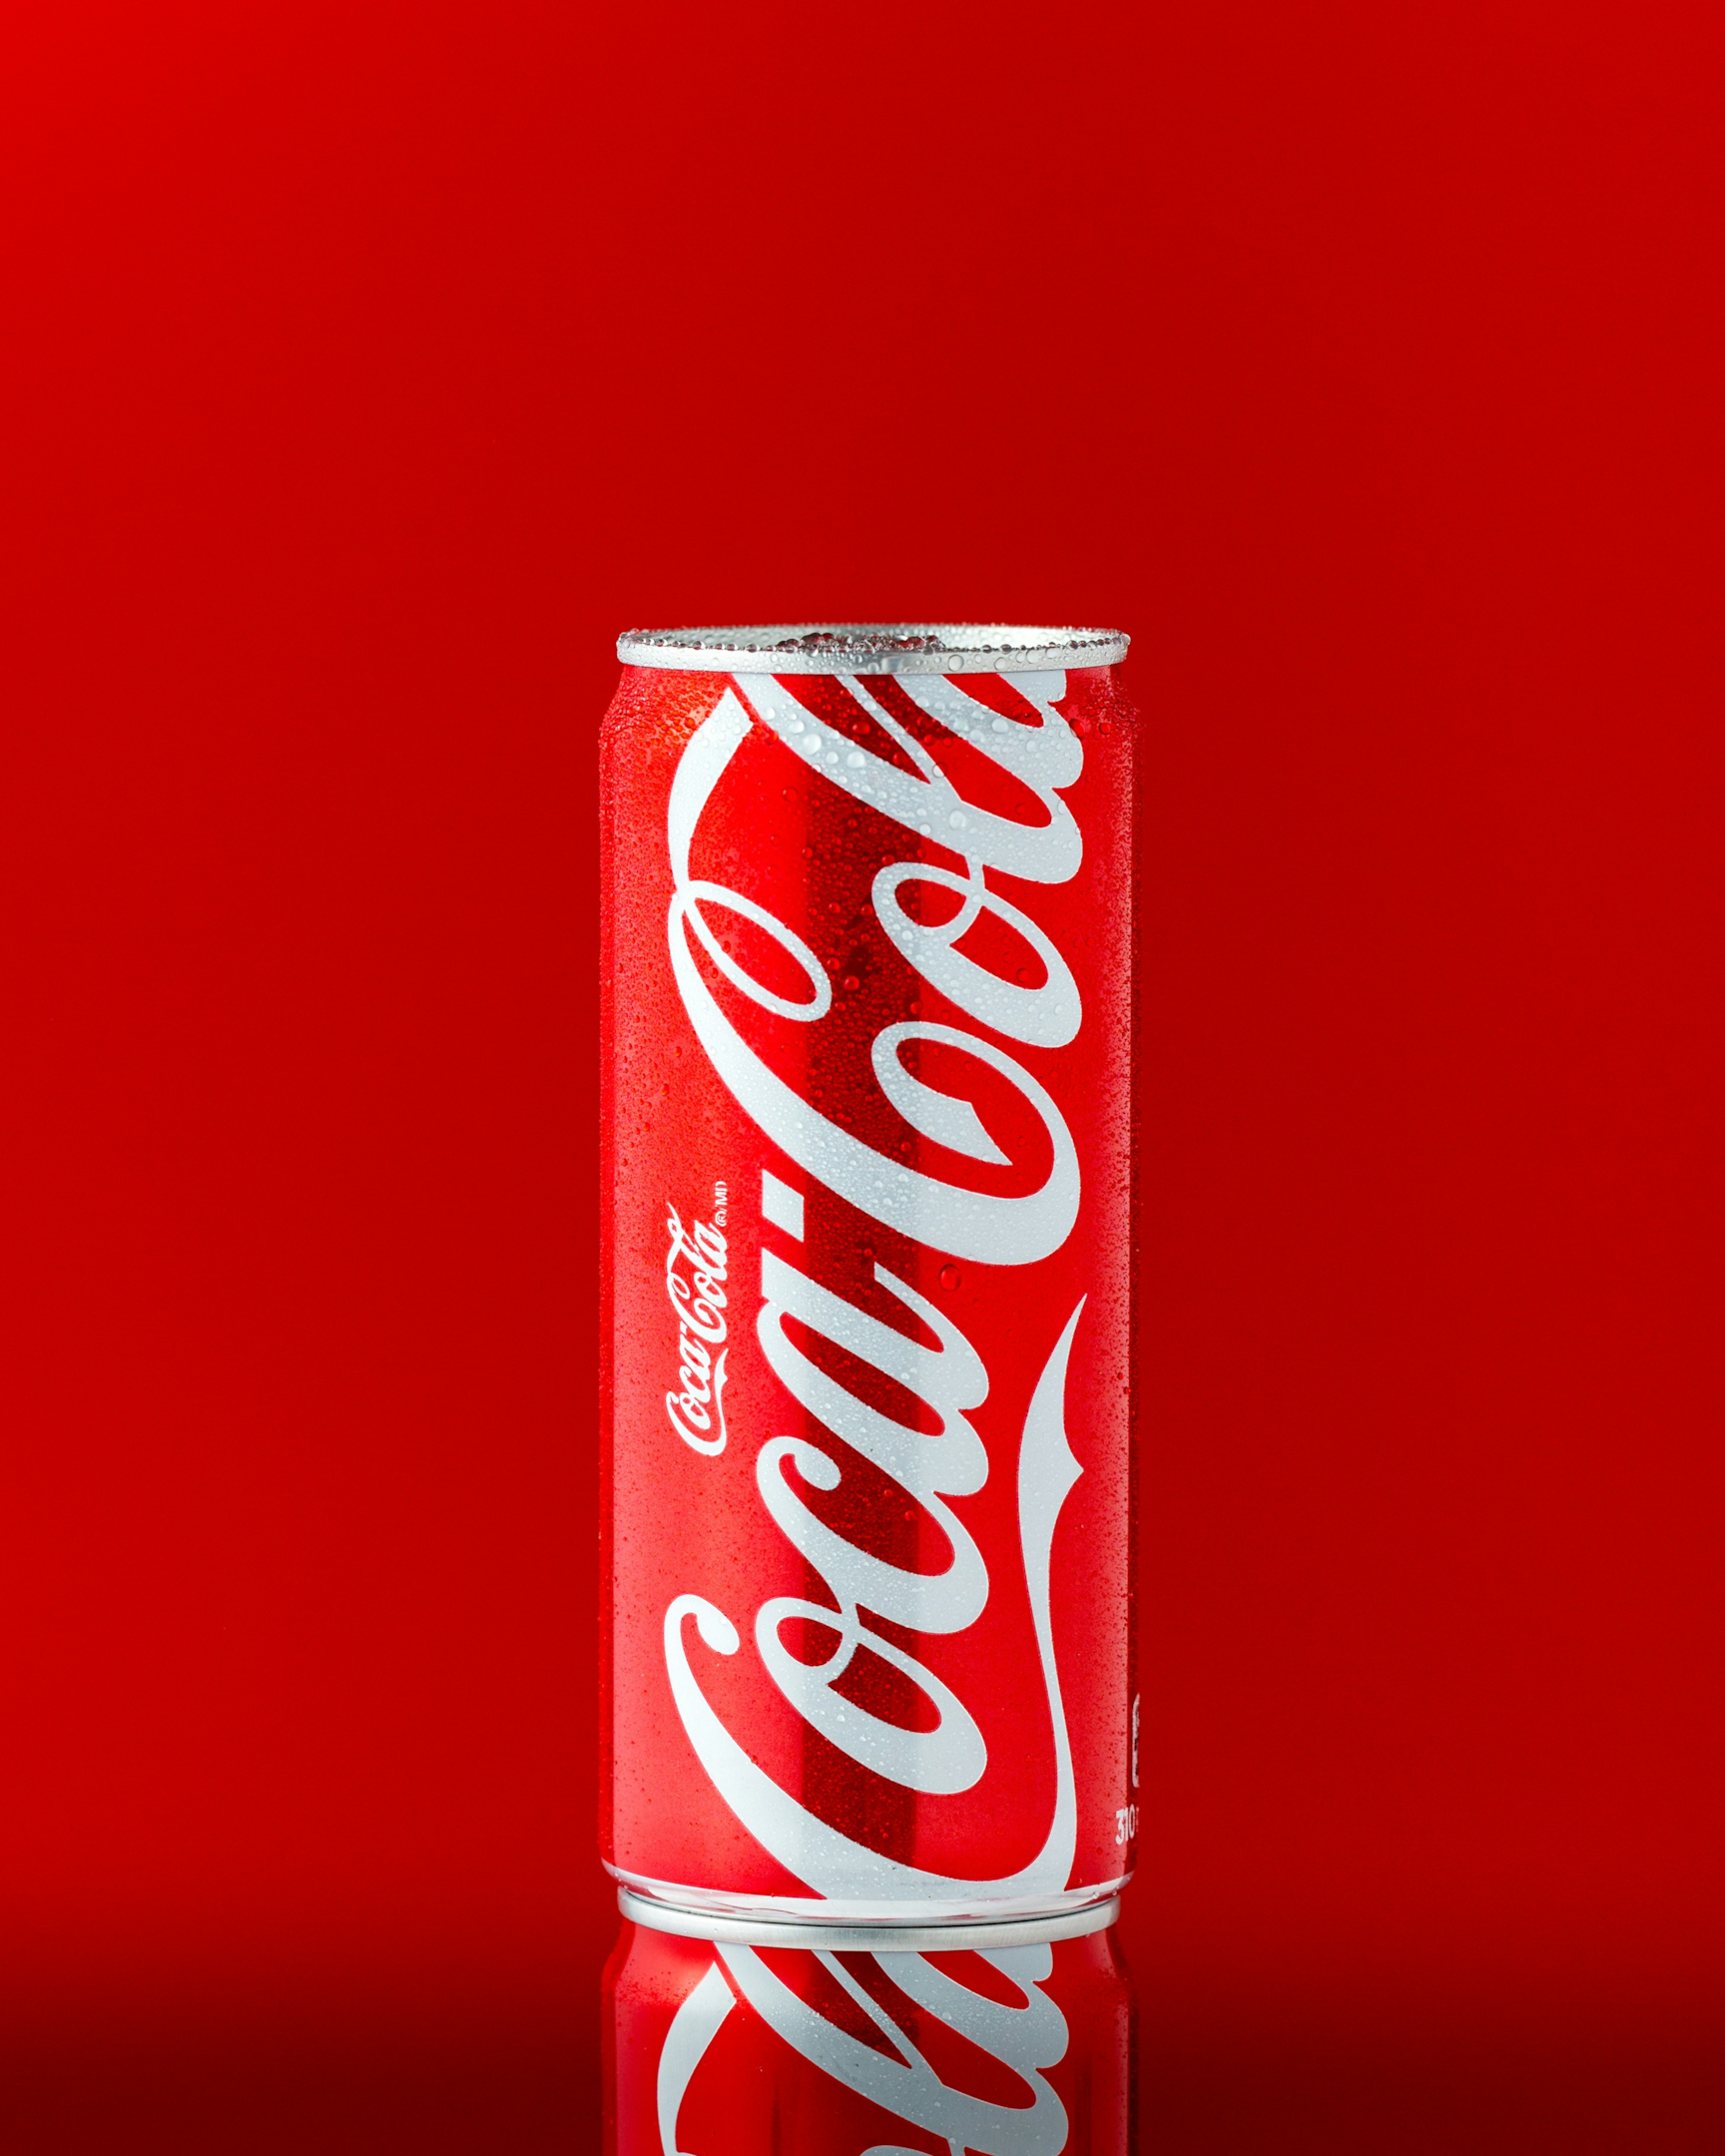 A signature color, like Coke's red, can help your brand become recognizable.